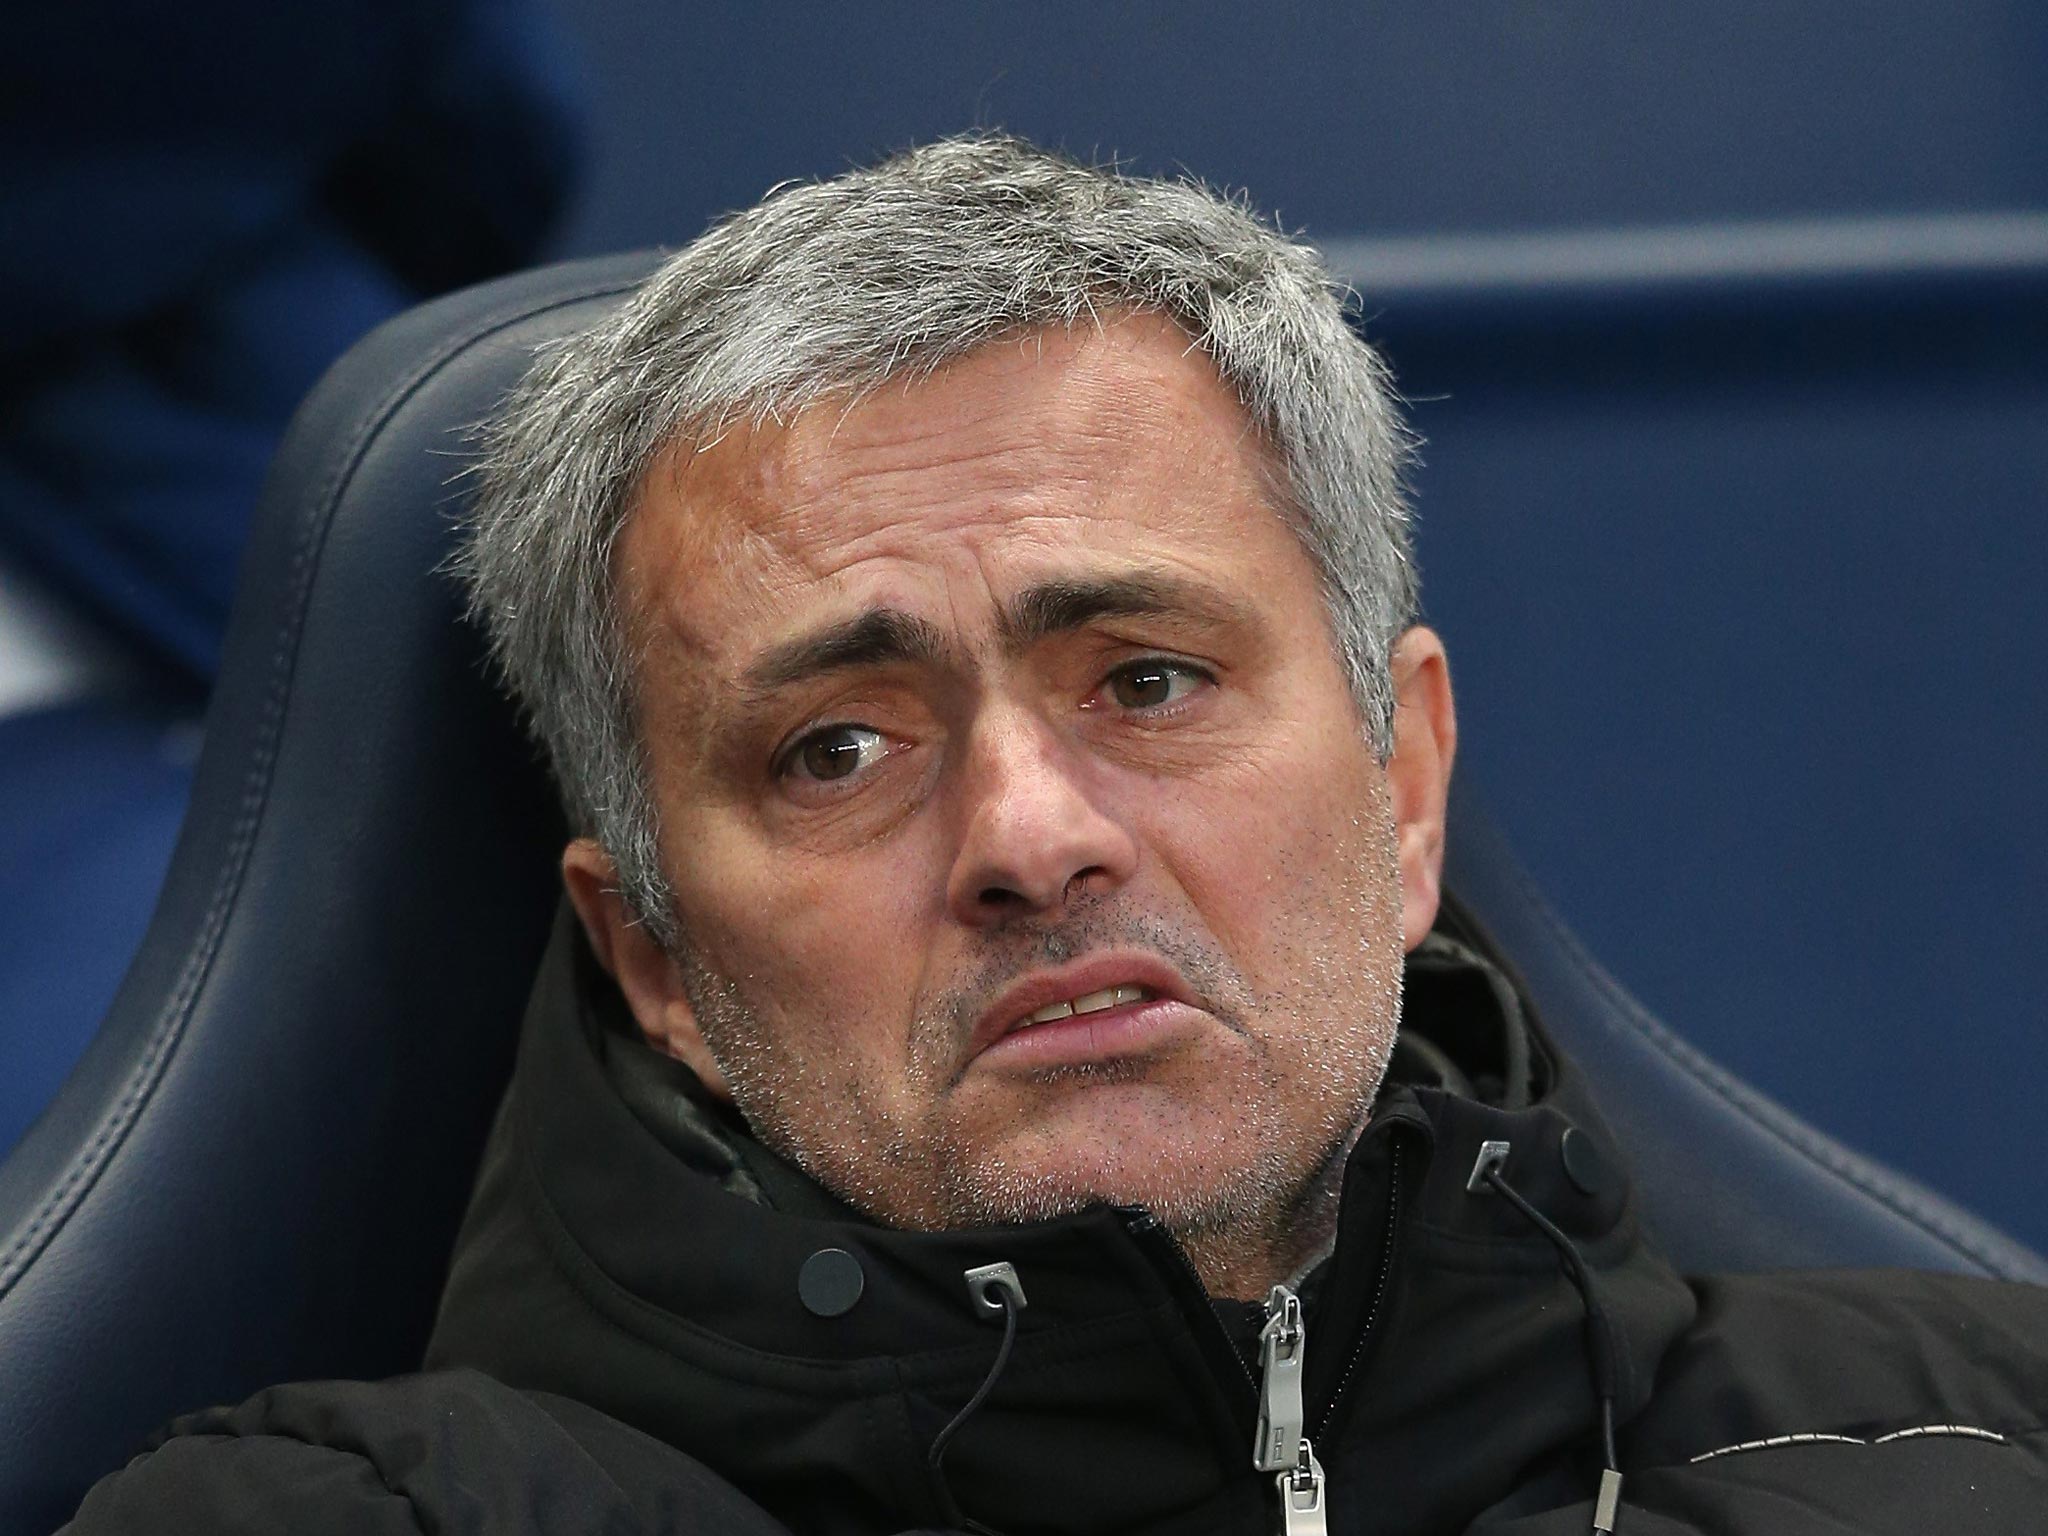 The Chelsea manager Jose Mourinho was barely willing to talk about anything outside of Stamford Bridge yesterday